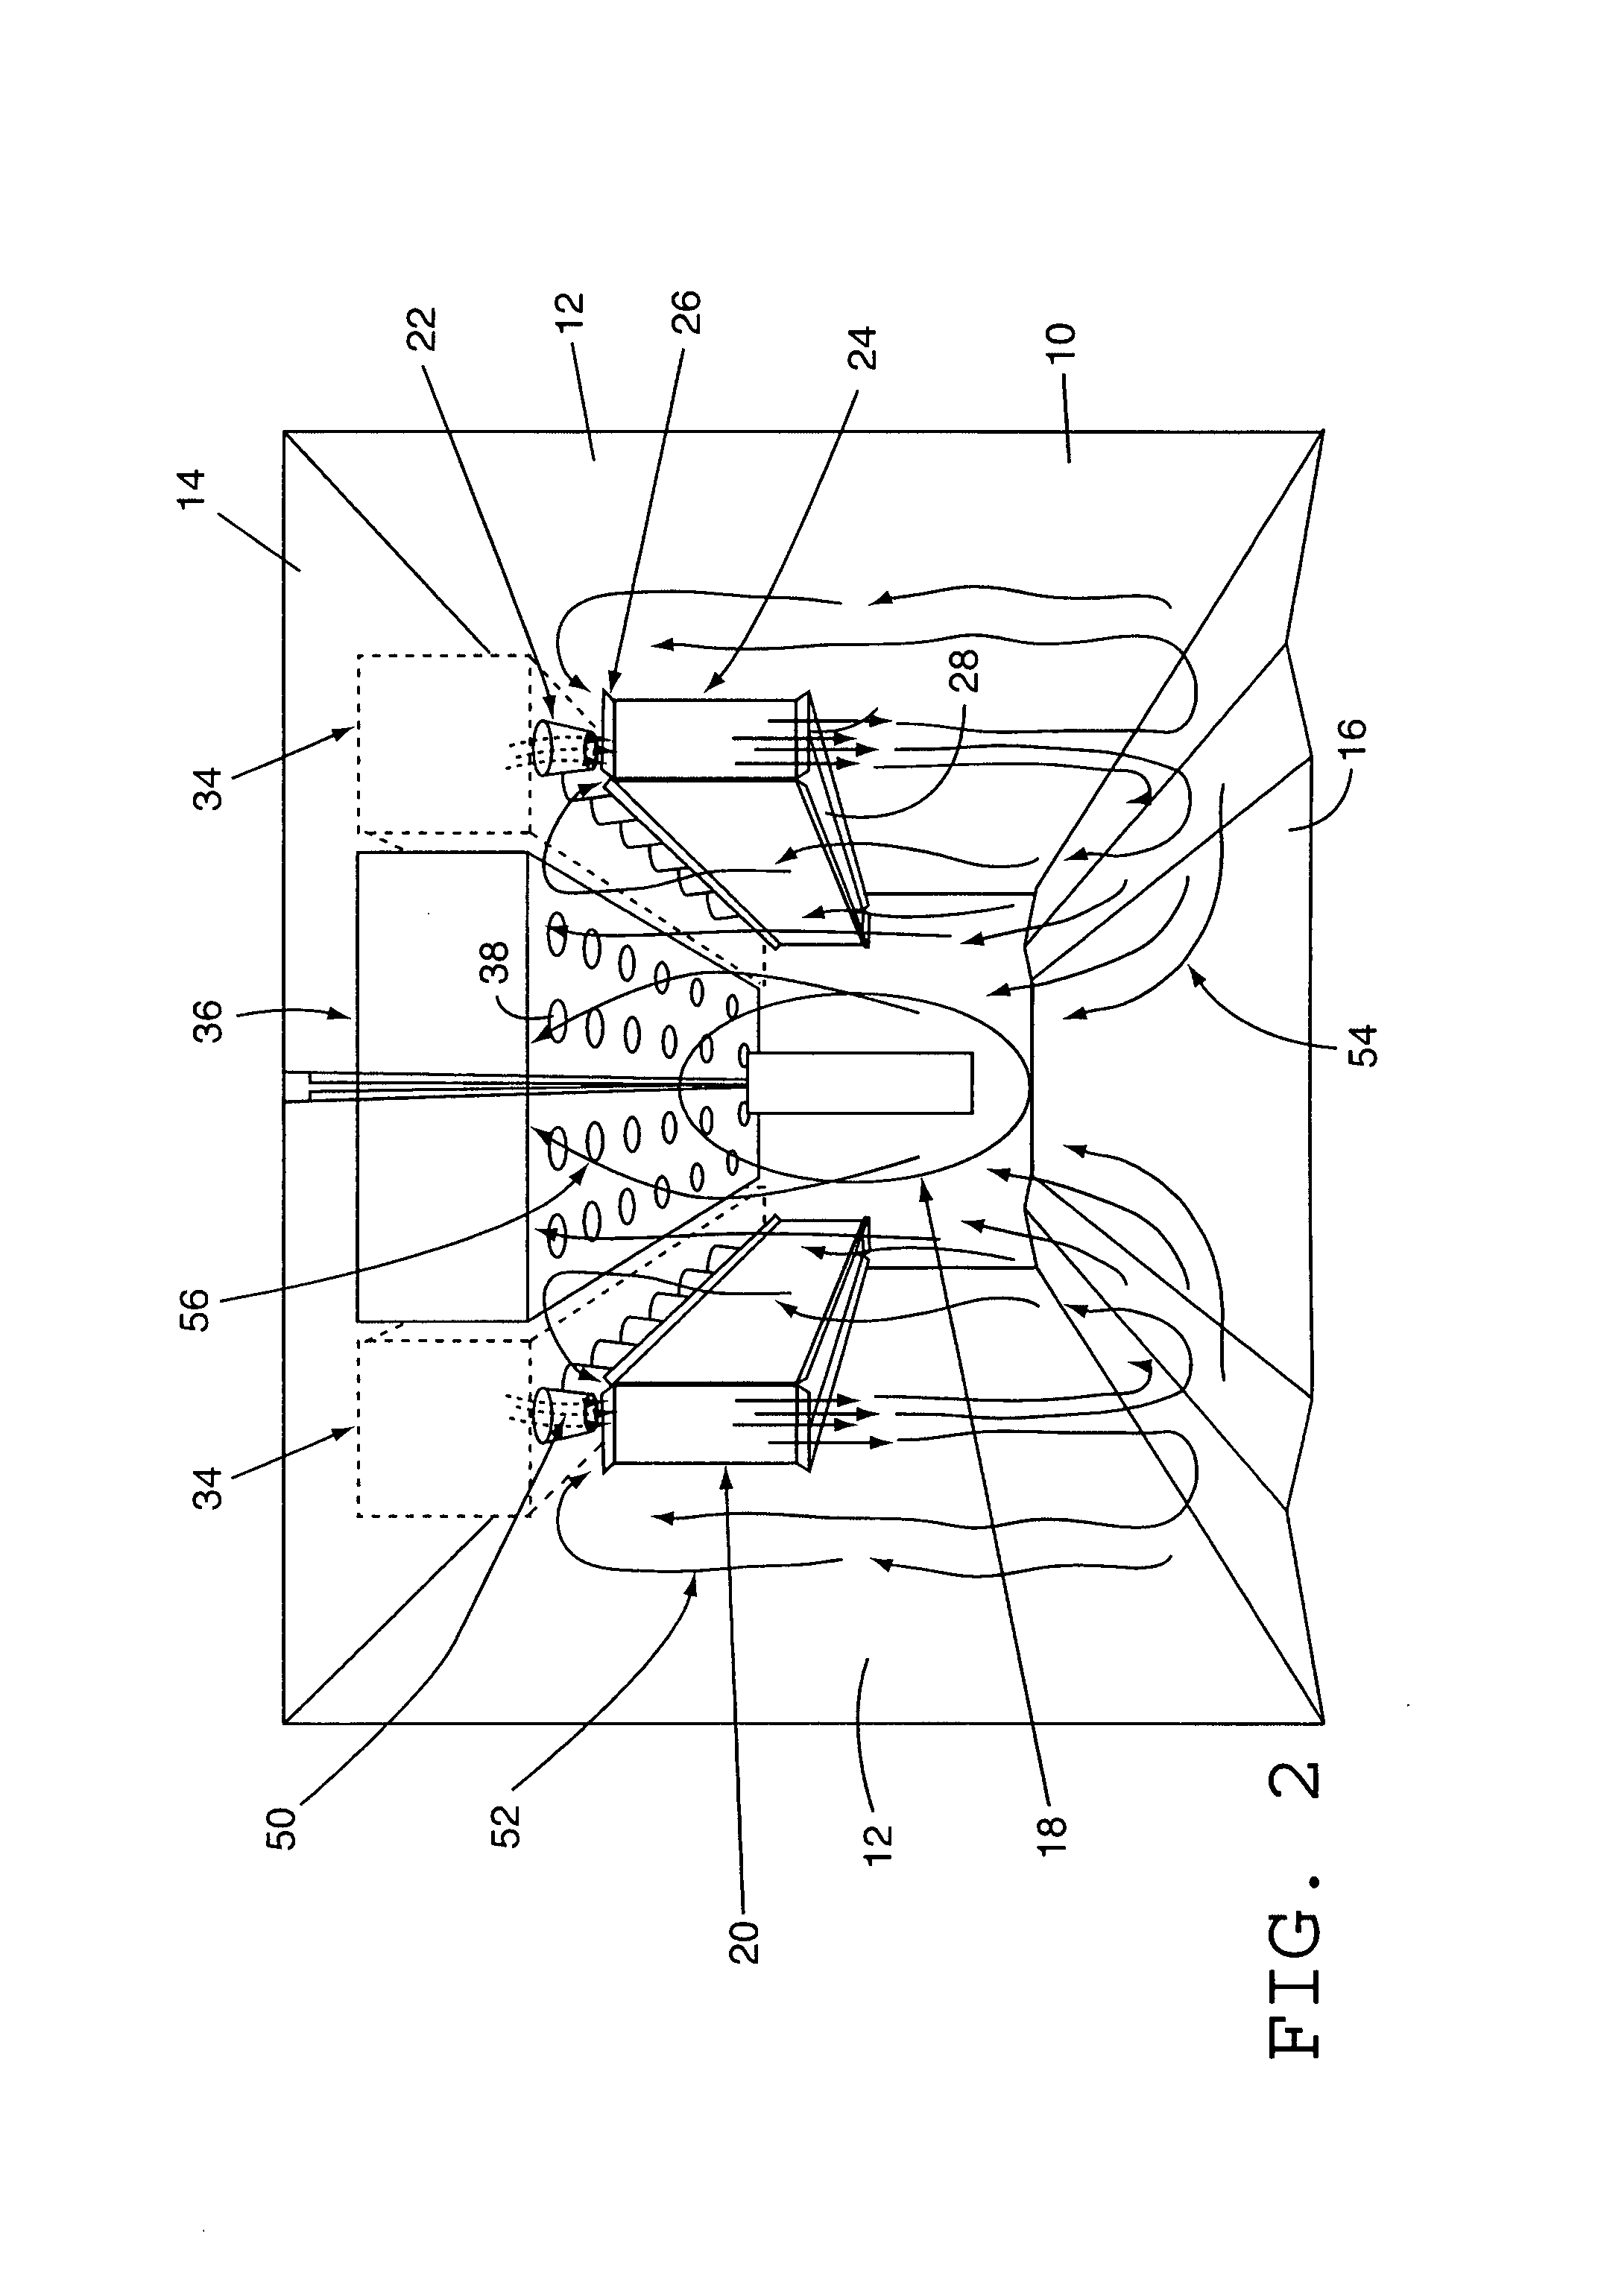 Convection oven with turbo flow air nozzle to increase air flow and method of using same